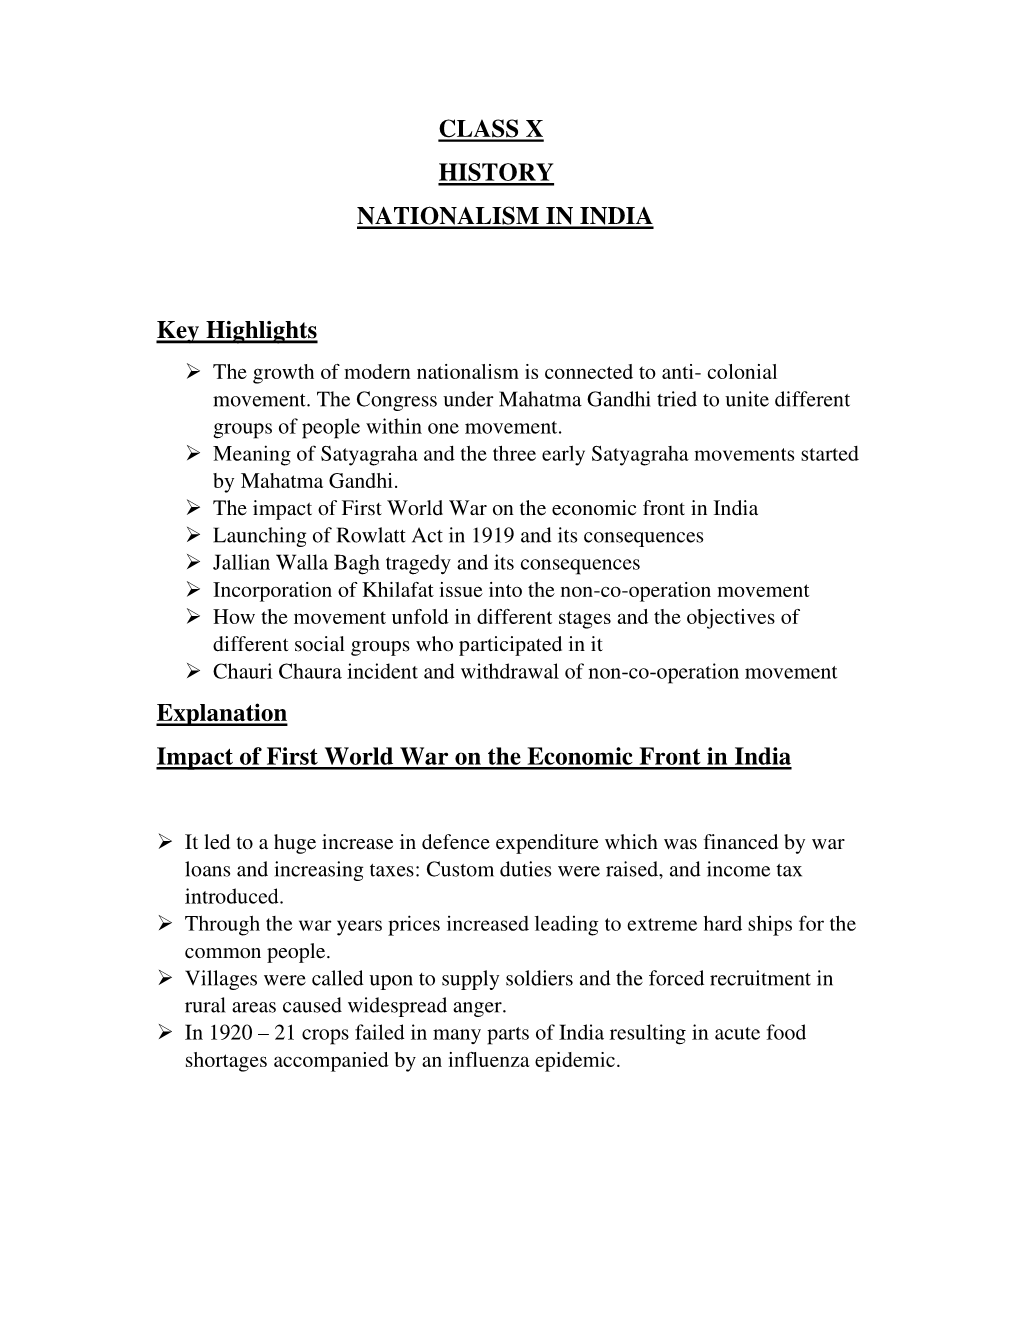 CLASS X HISTORY NATIONALISM in INDIA Key Highlights Explanation